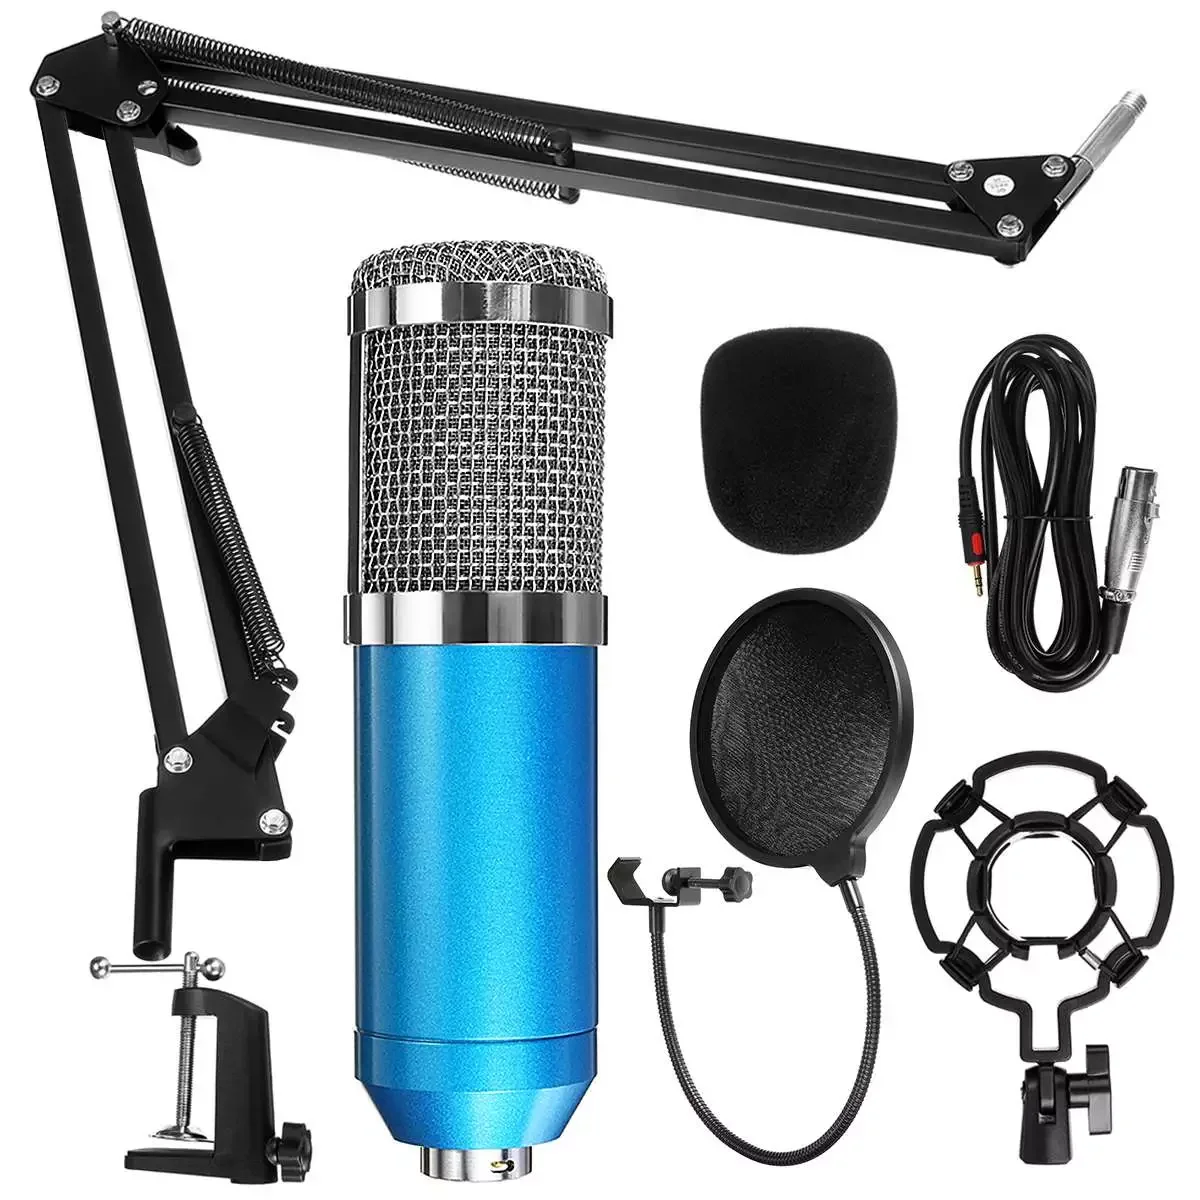 

Professional Anchor Microphone Condenser Microphone Full Set Bundle Mikrofon Computer Streaming Podcasting Vocal Record